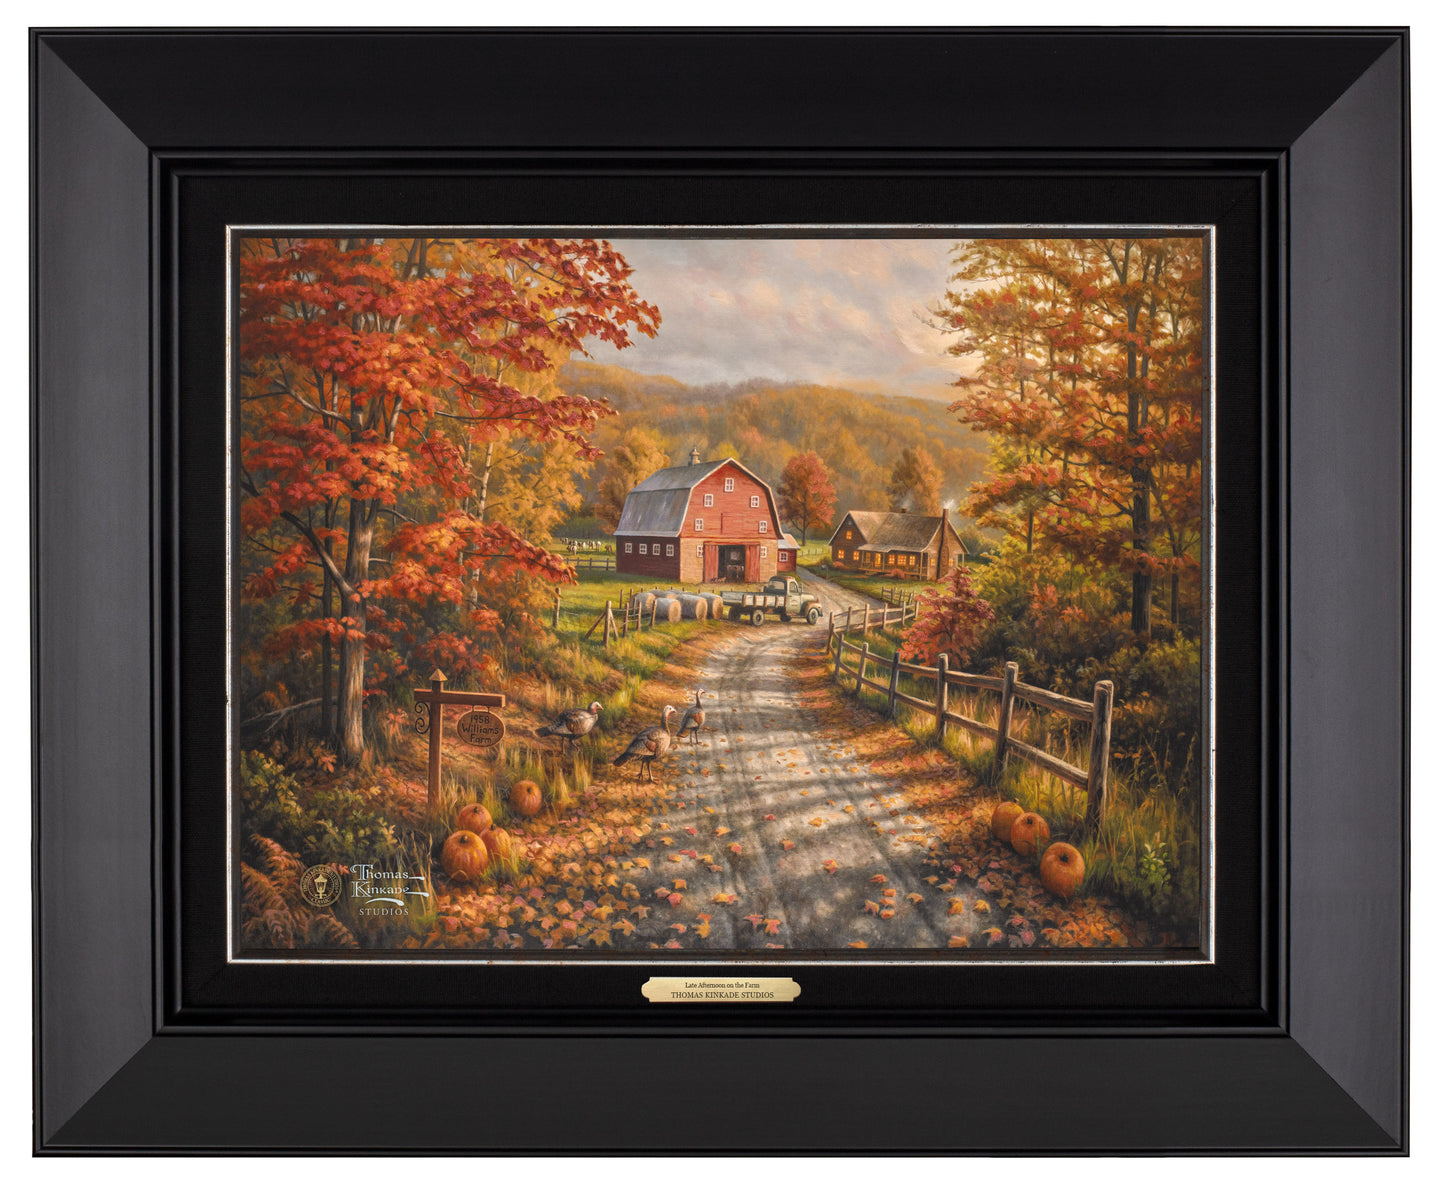 161460_CLF Late Afternoon on the Farm 12X16 Classic - Black.jpg